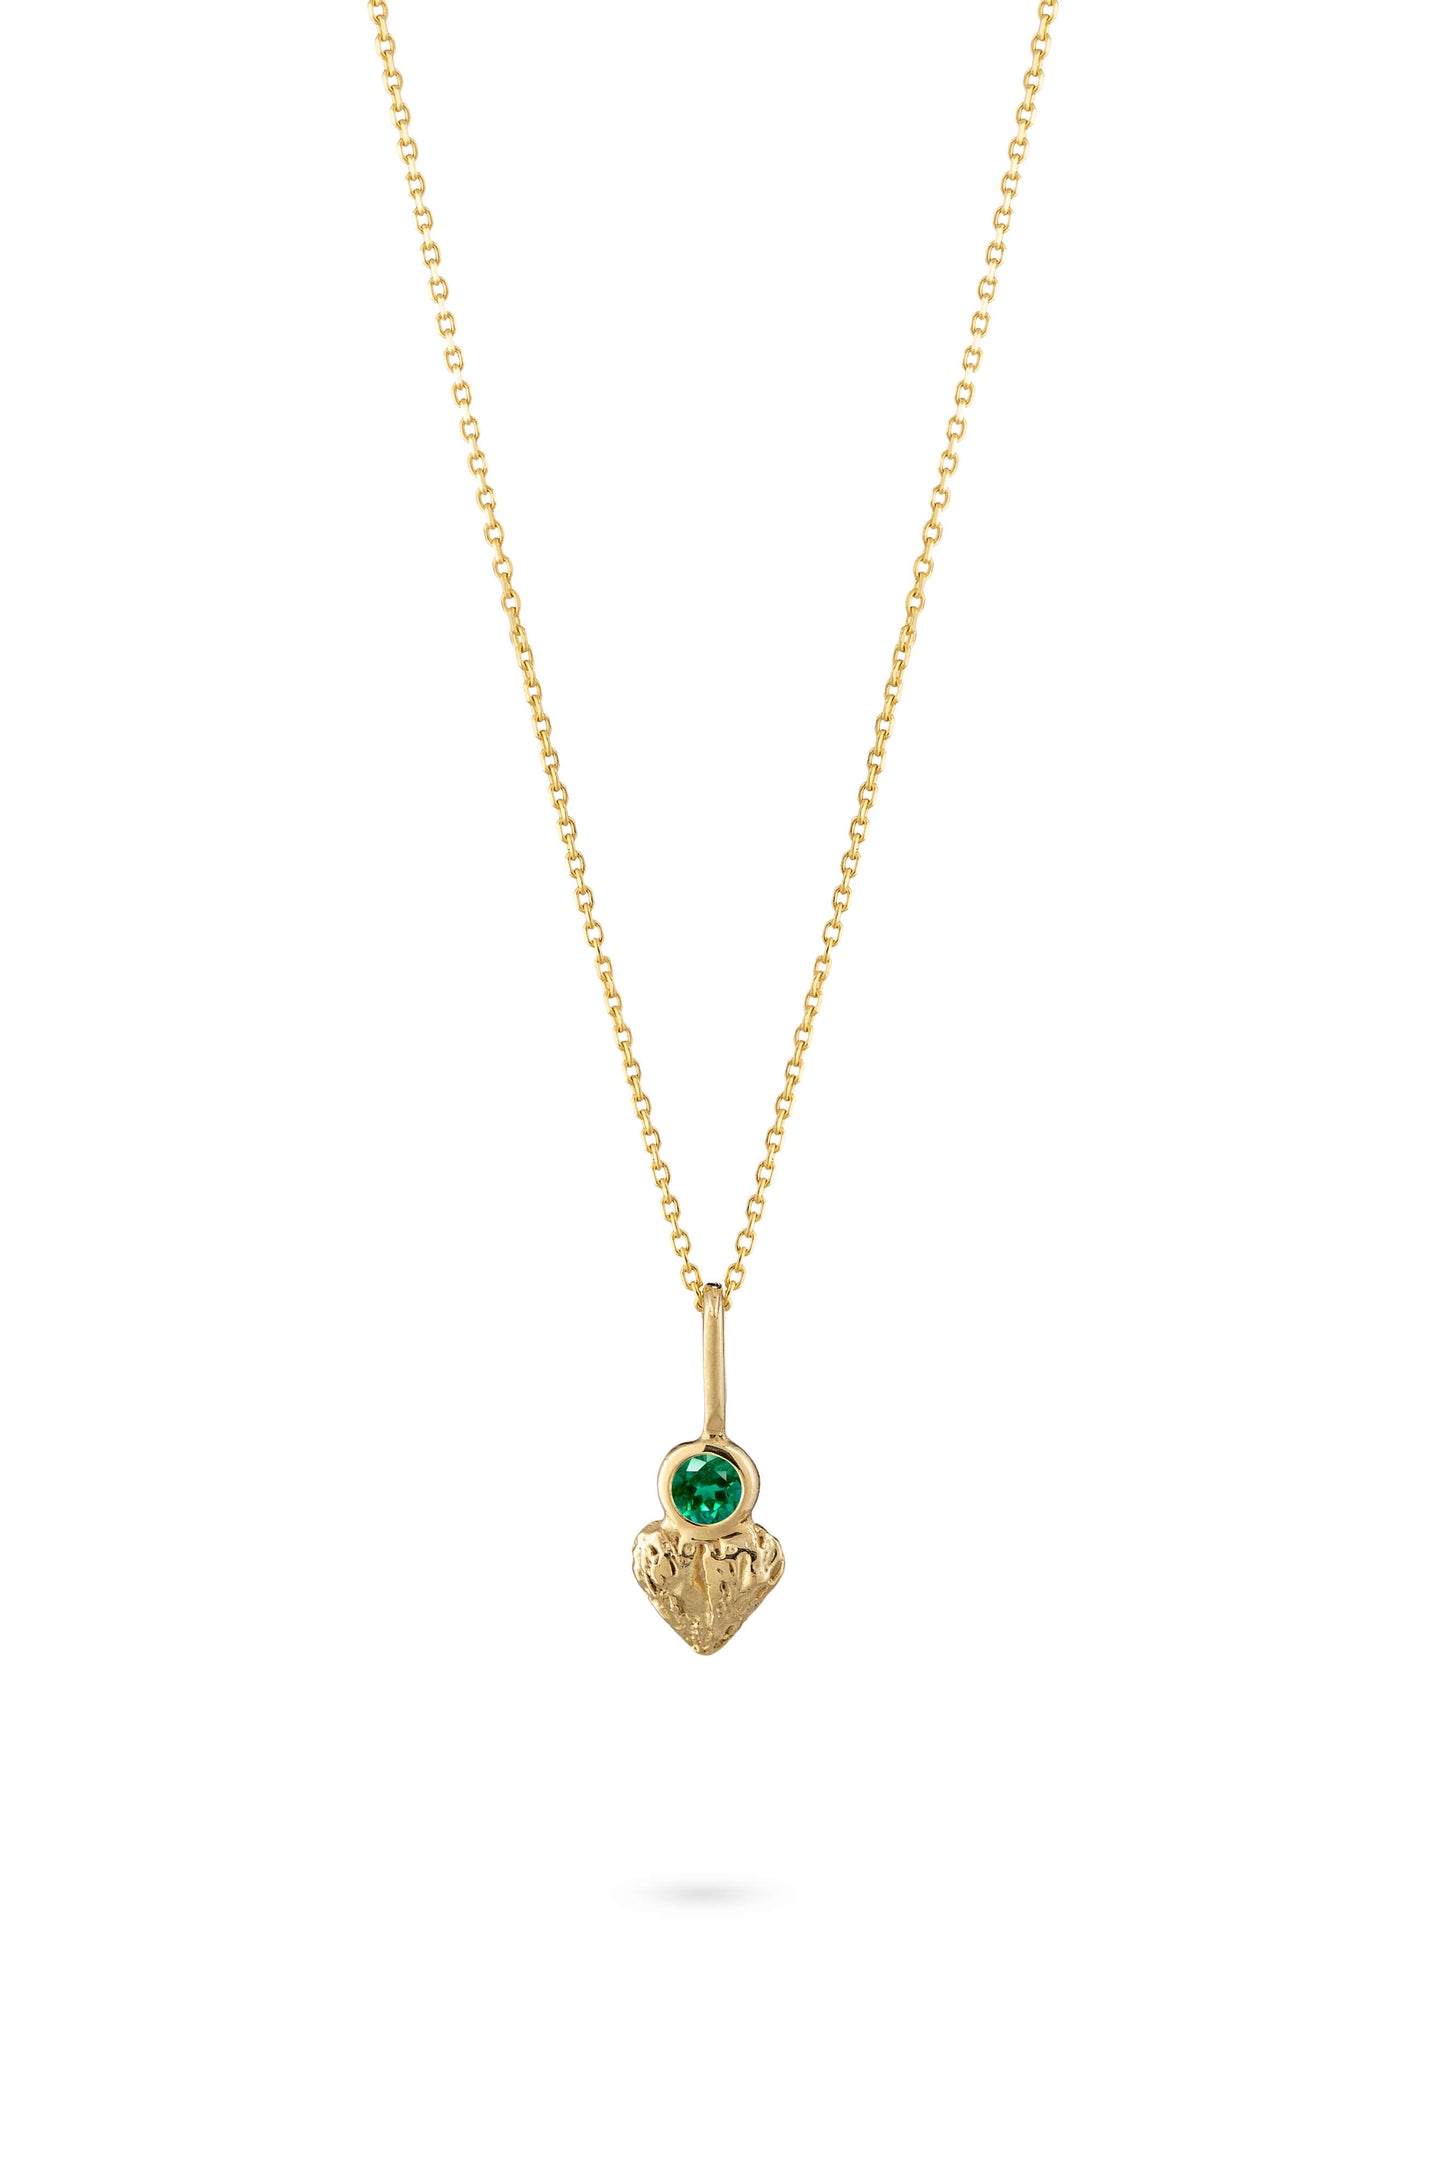 Heart Necklace - Angel's Wings with Emerald / S